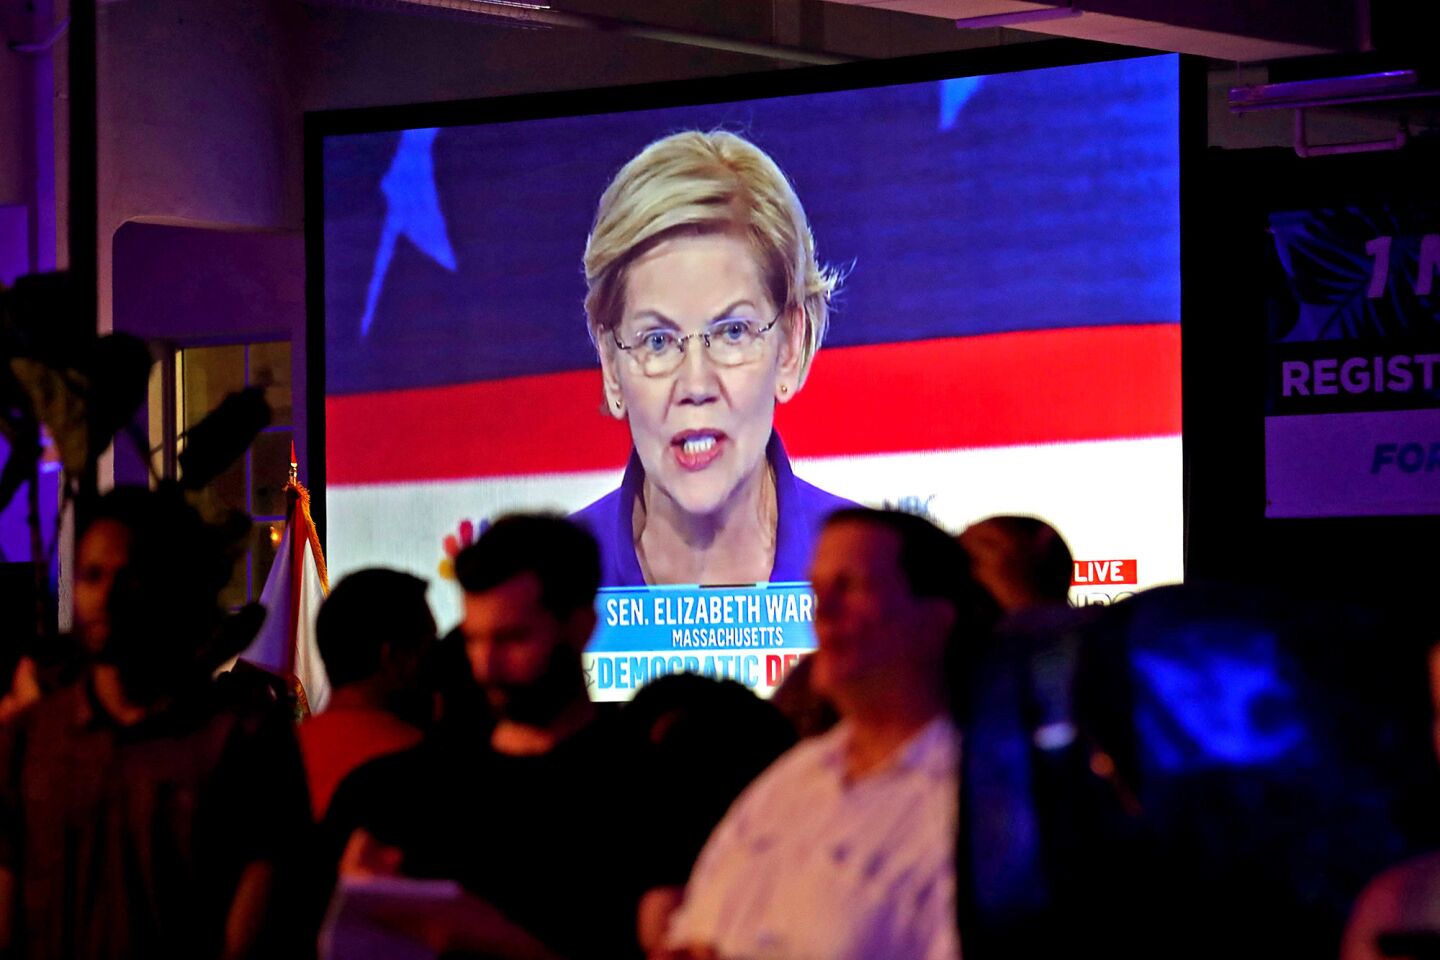 Sen. Elizabeth Warren (D-Mass.) is seen on a television at a watch party for the first Democratic presidential primary debates for the 2020 elections in Miami on Wednesday, June 26, 2019.